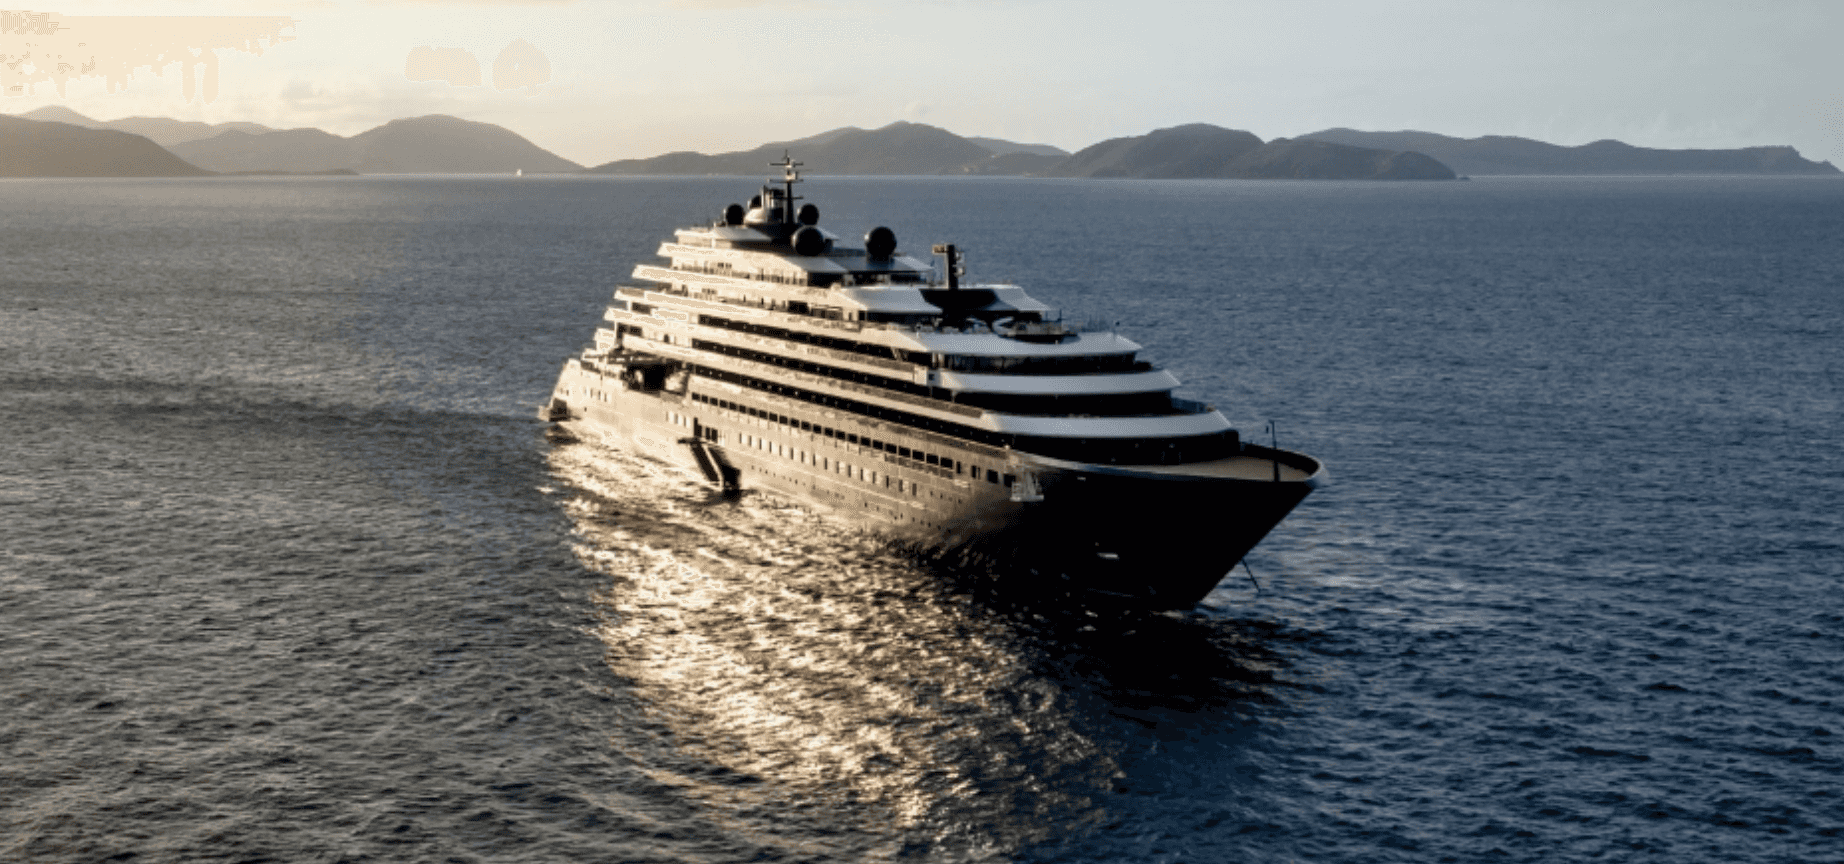 Spend one of your cruise ship vacations aboard the Ritz Carlton Yacht Collection’s Evrima